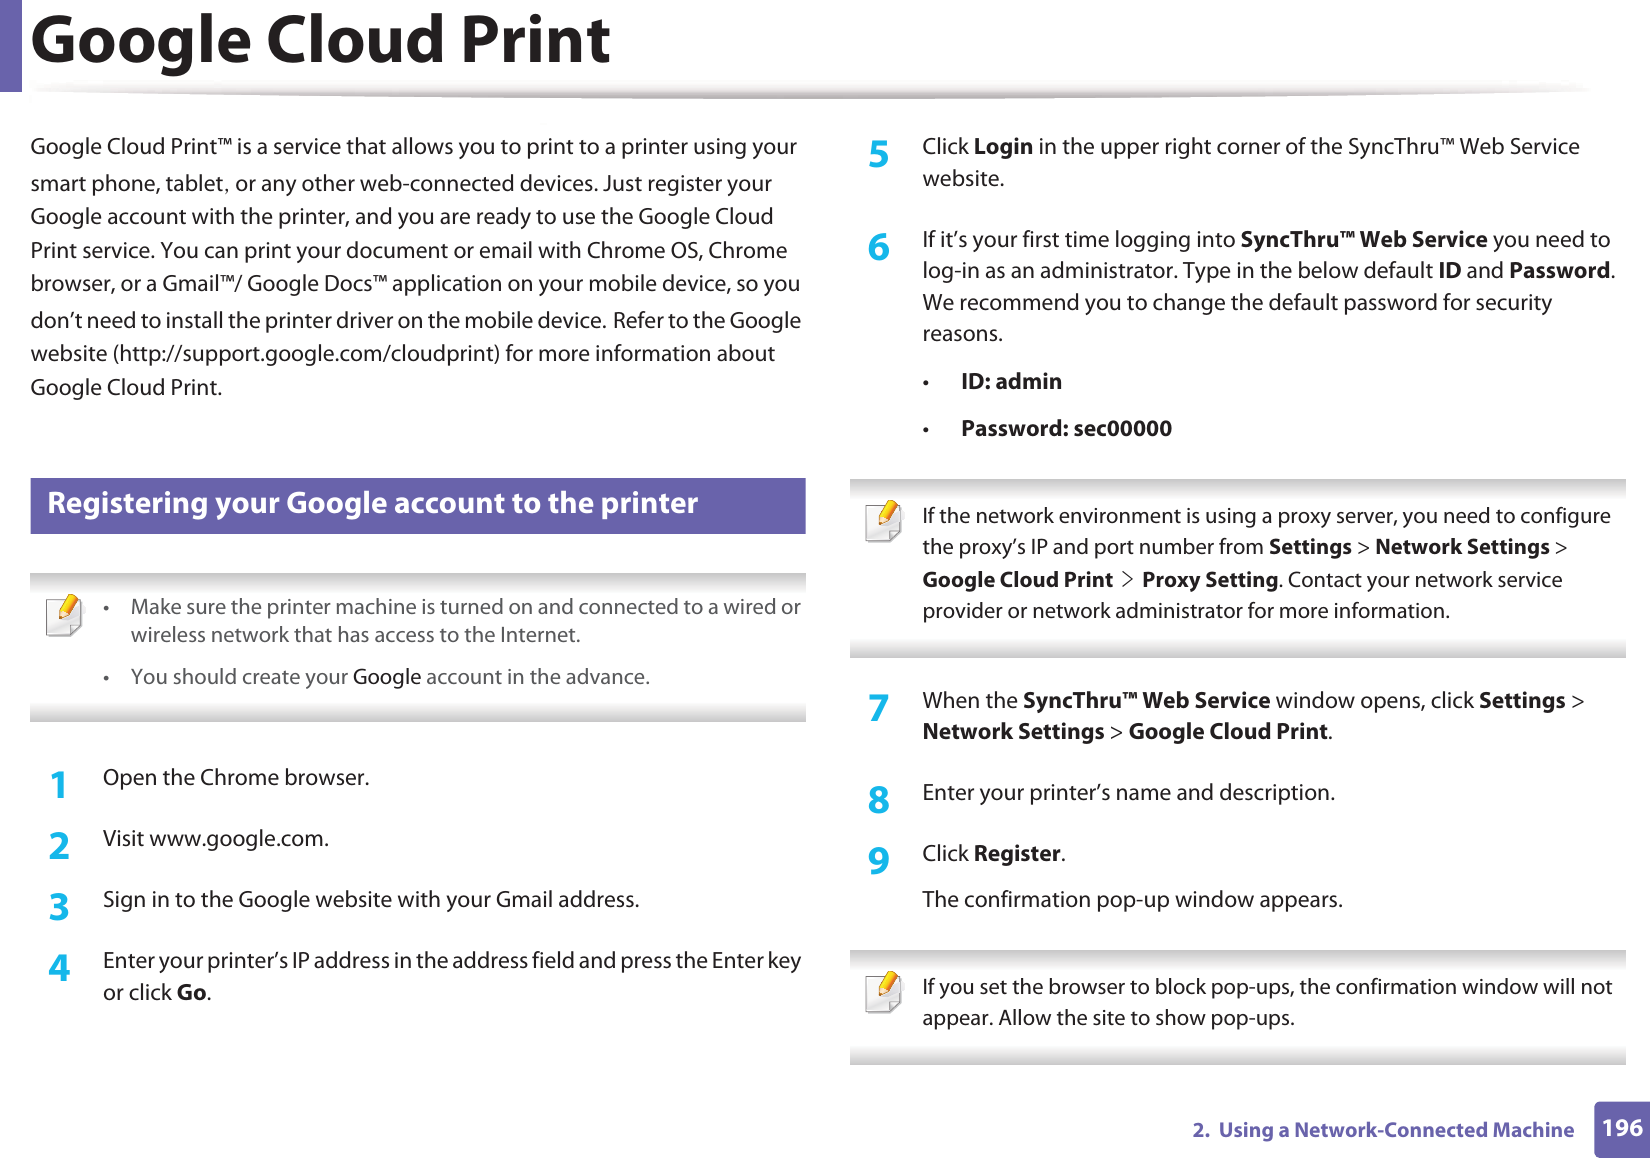 1962.  Using a Network-Connected MachineGoogle Cloud PrintGoogle Cloud Print™ is a service that allows you to print to a printer using your smart phone, tabletS or any other web-connected devices. Just register your Google account with the printer, and you are ready to use the Google Cloud Print service. You can print your document or email with Chrome OS, Chrome browser, or a Gmail™/ Google Docs™ application on your mobile device, so you don’t need to install the printer driver on the mobile device.GRefer to the Google website (http://support.google.com/cloudprint) for more information about Google Cloud Print.27 Registering your Google account to the printer • Make sure the printer machine is turned on and connected to a wired or wireless network that has access to the Internet. •You should create your Google account in the advance.  1Open the Chrome browser.2  Visit www.google.com.3  Sign in to the Google website with your Gmail address.4  Enter your printer’s IP address in the address field and press the Enter key or click Go.5  Click Login in the upper right corner of the SyncThru™ Web Service website.6  If it’s your first time logging into SyncThru™ Web Service you need to log-in as an administrator. Type in the below default ID and Password. We recommend you to change the default password for security reasons.•ID: admin•Password: sec00000  If the network environment is using a proxy server, you need to configure the proxy’s IP and port number from Settings &gt; Network Settings &gt; Google Cloud PrintGeGProxy Setting. Contact your network service provider or network administrator for more information.  7  When the SyncThru™ Web Service window opens, click Settings &gt; Network Settings &gt; Google Cloud Print.8  Enter your printer’s name and description.9  Click Register.The confirmation pop-up window appears. If you set the browser to block pop-ups, the confirmation window will not appear. Allow the site to show pop-ups.  